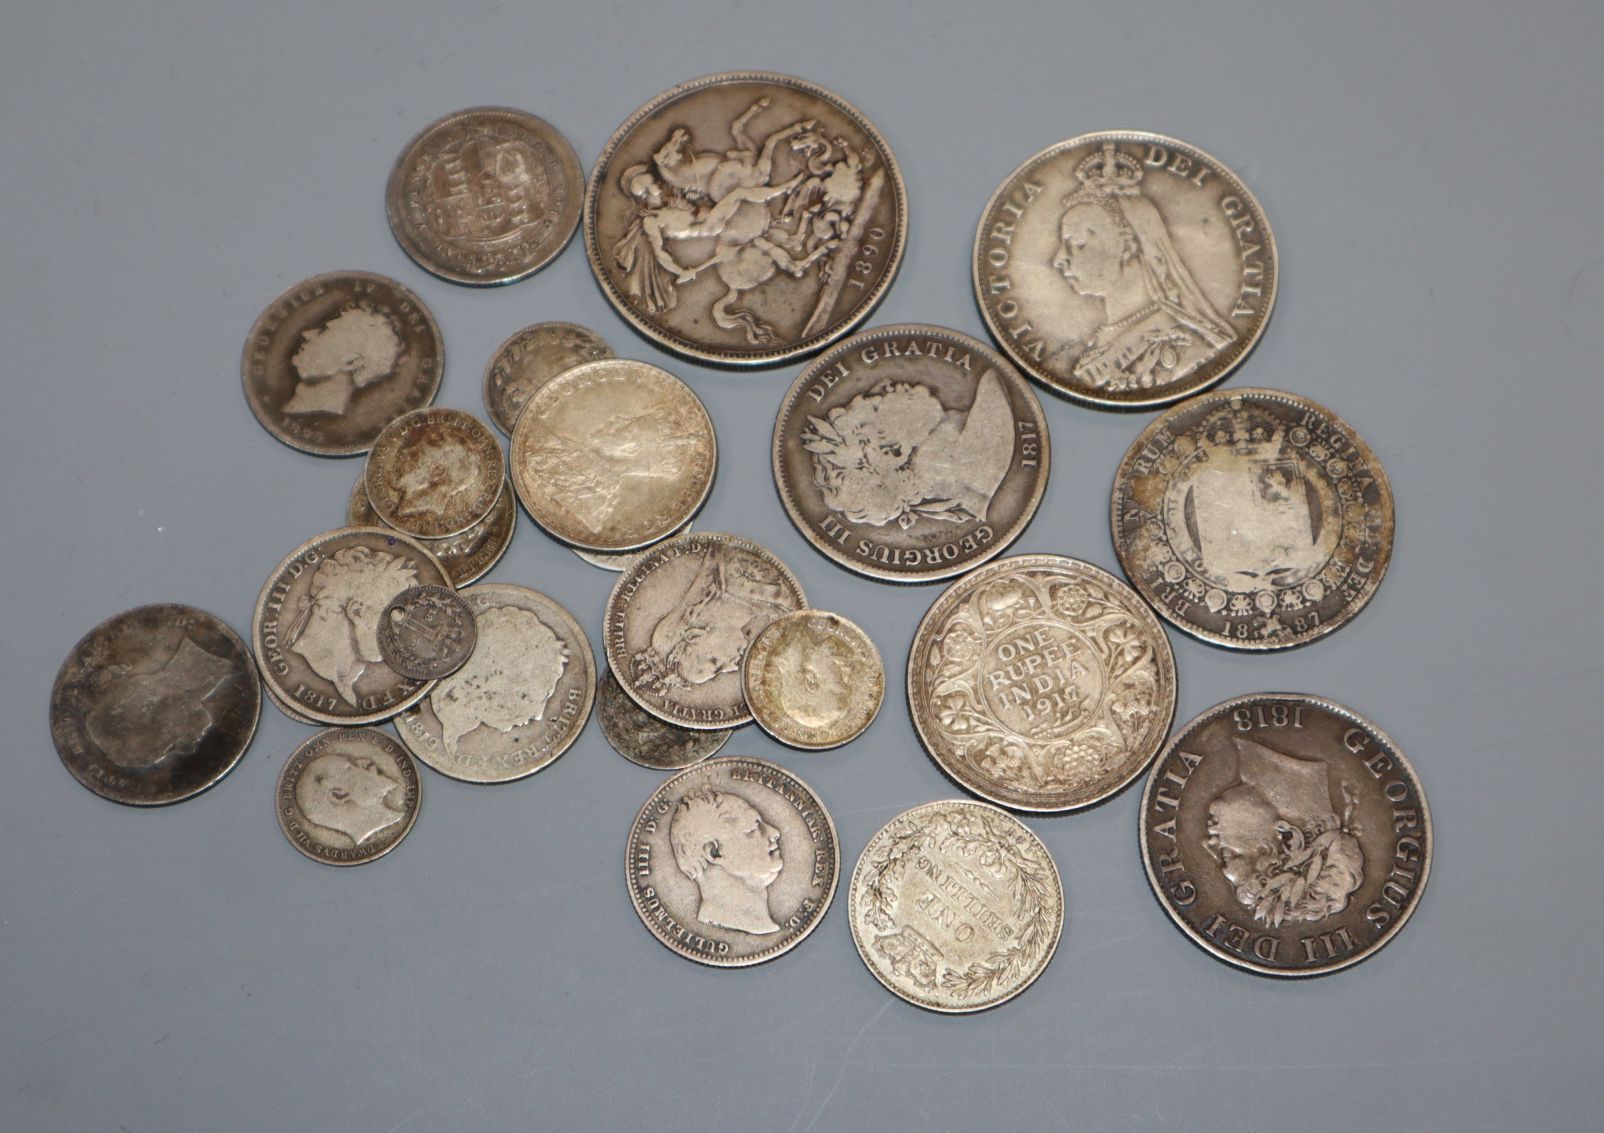 English silver coinage, Charles II and later, including an 1817 half crown, an1890 crown, an 1887